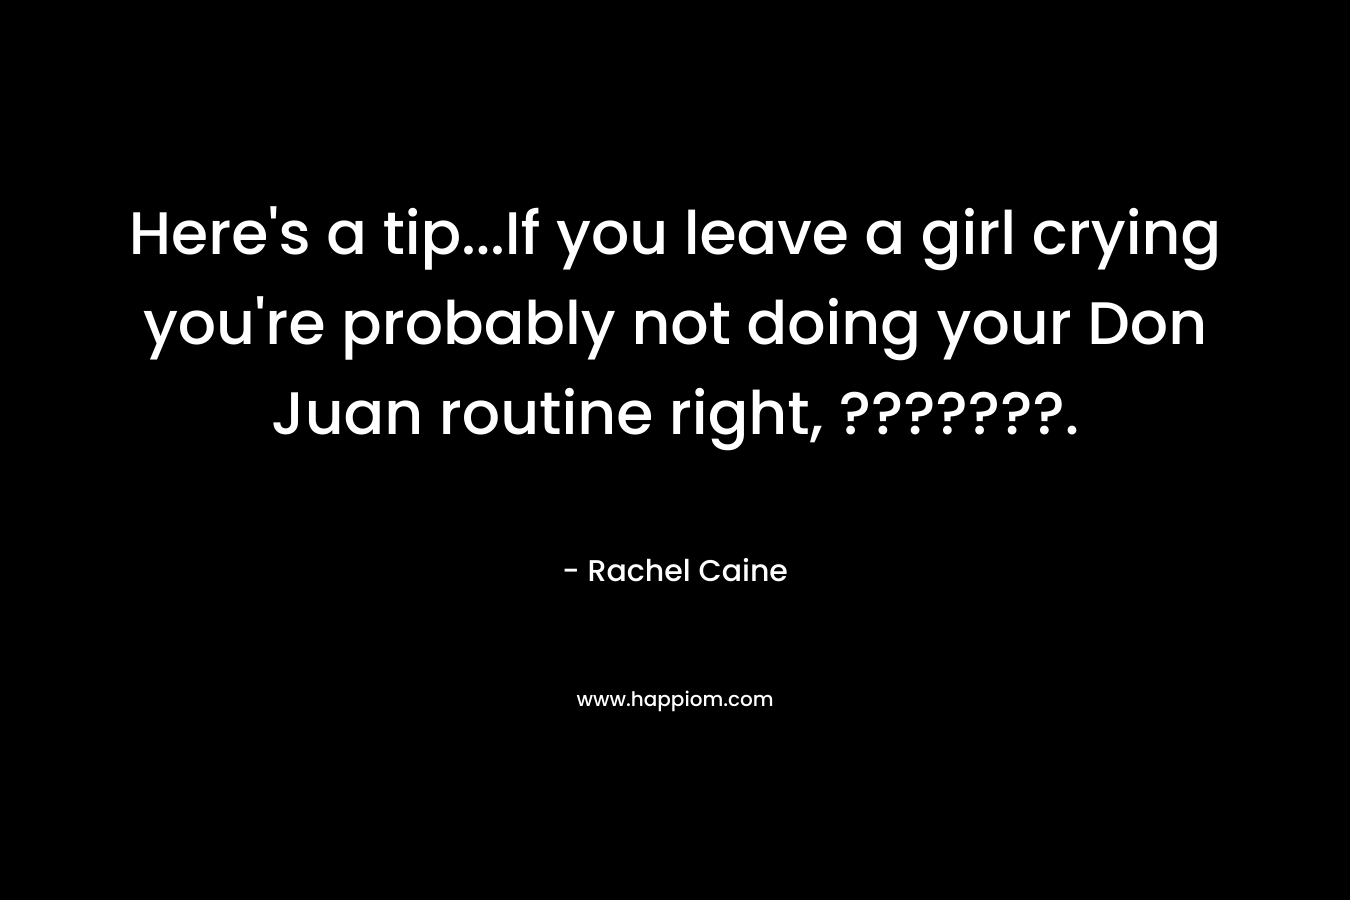 Here’s a tip…If you leave a girl crying you’re probably not doing your Don Juan routine right, ???????. – Rachel Caine